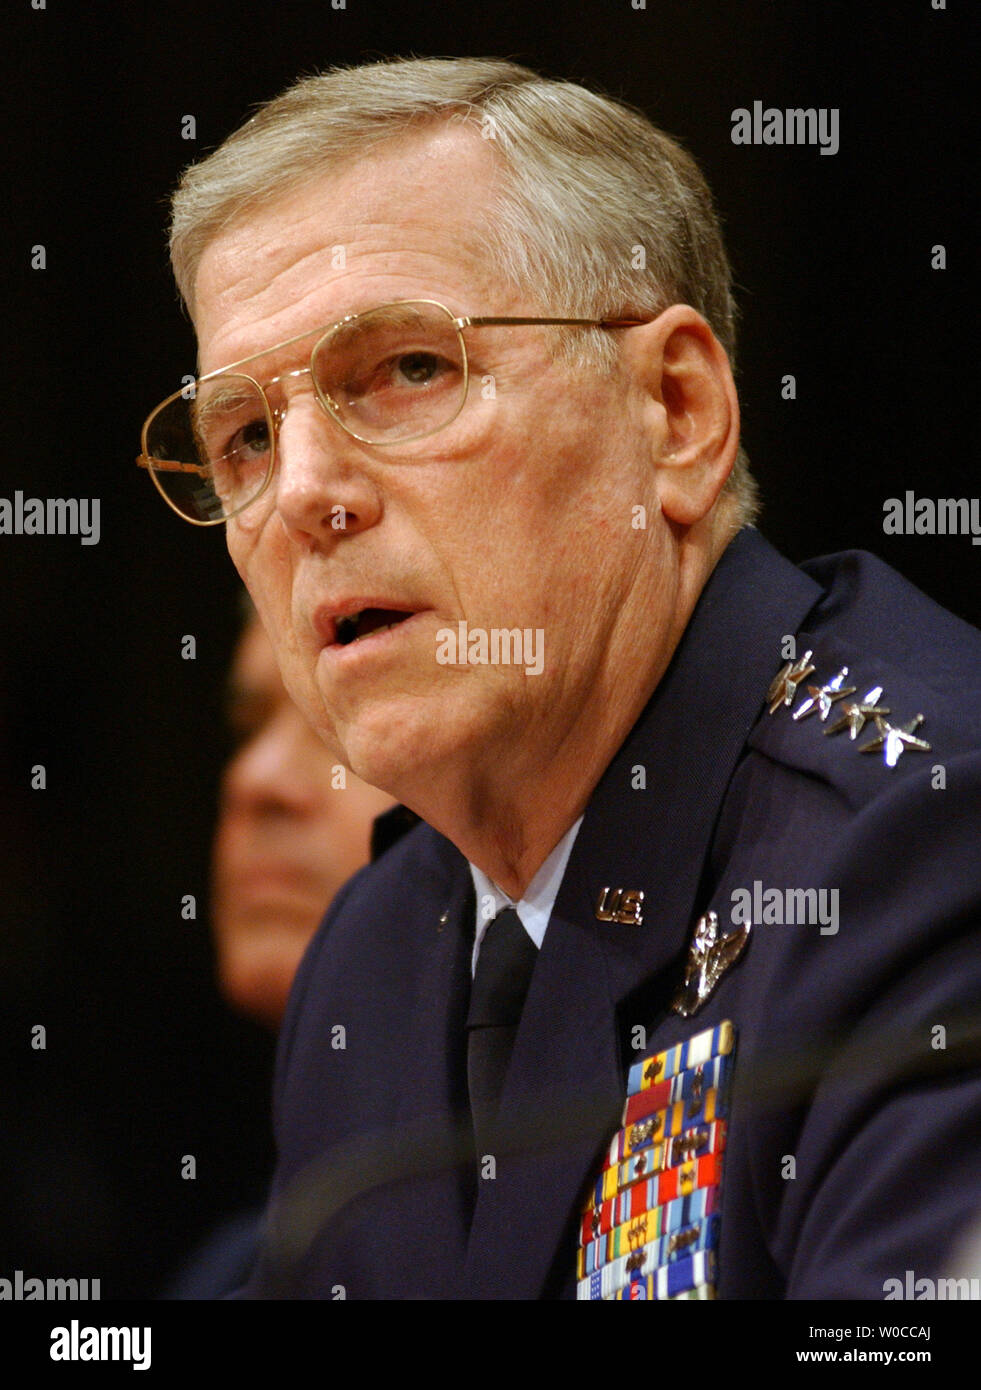 Chairman of the Joint Chiefs of Staff Richard B. Myers testifies about Iraqi prisoner abuse before the Senate Armed Services Committee on Capitol Hill in Washington on May 7, 2004.       (UPI Photo/Rick Steele) Stock Photo